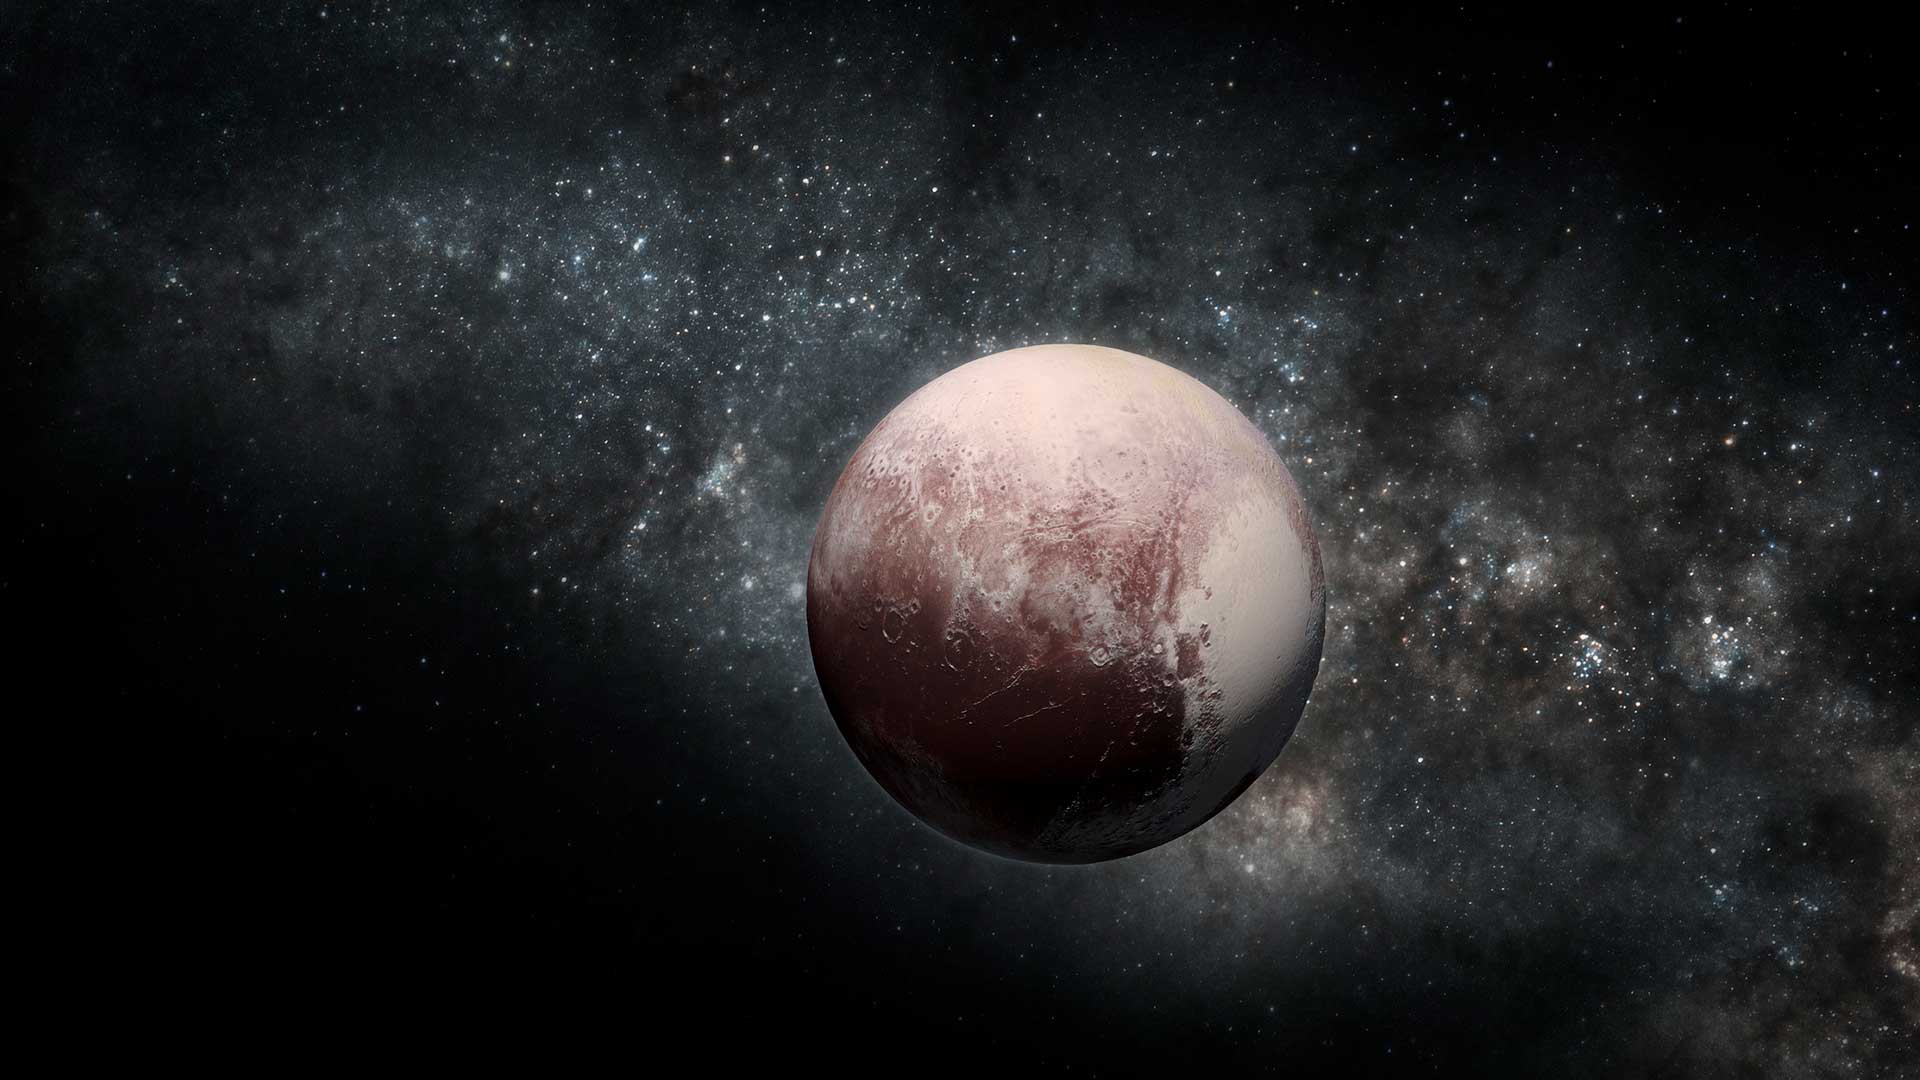 Pluto the planet as an illustration